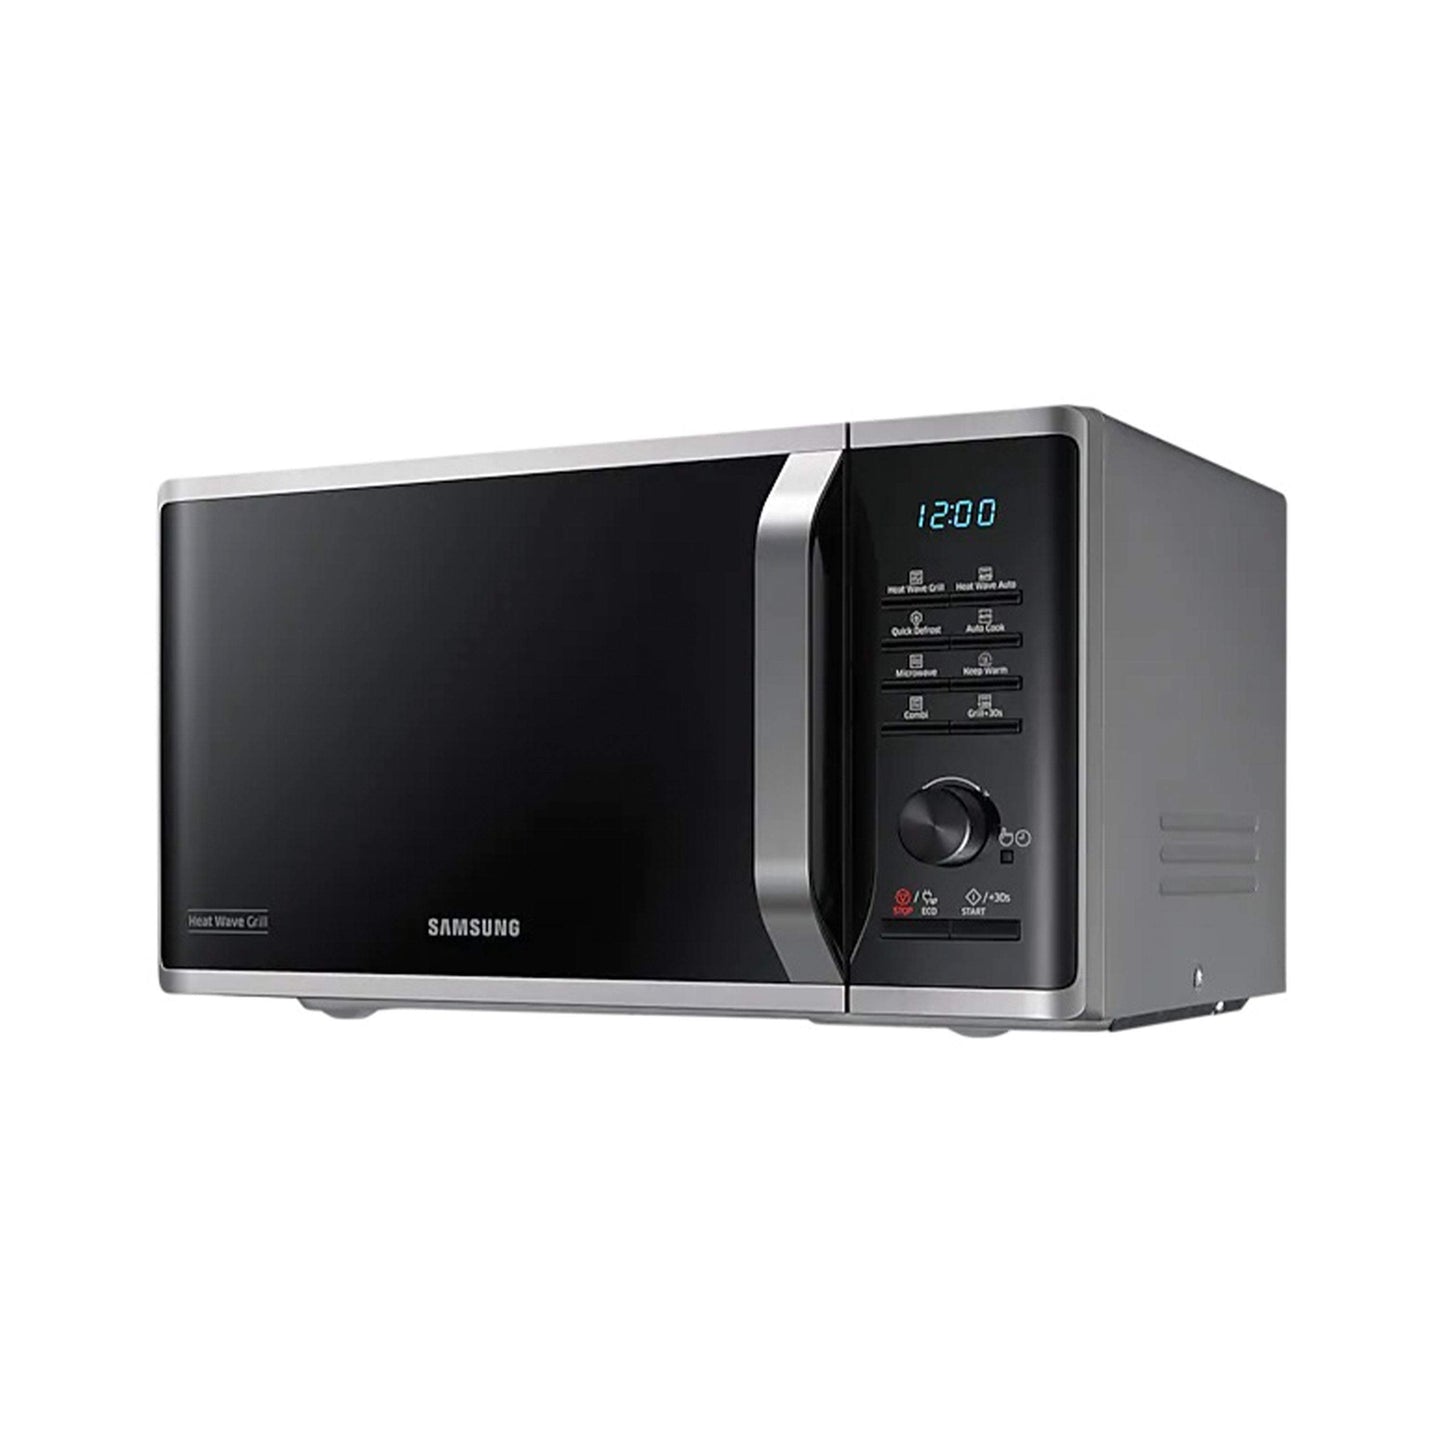 Samsung Microwave Oven with Heat Wave Grill, 23L-Royal Brands Co-